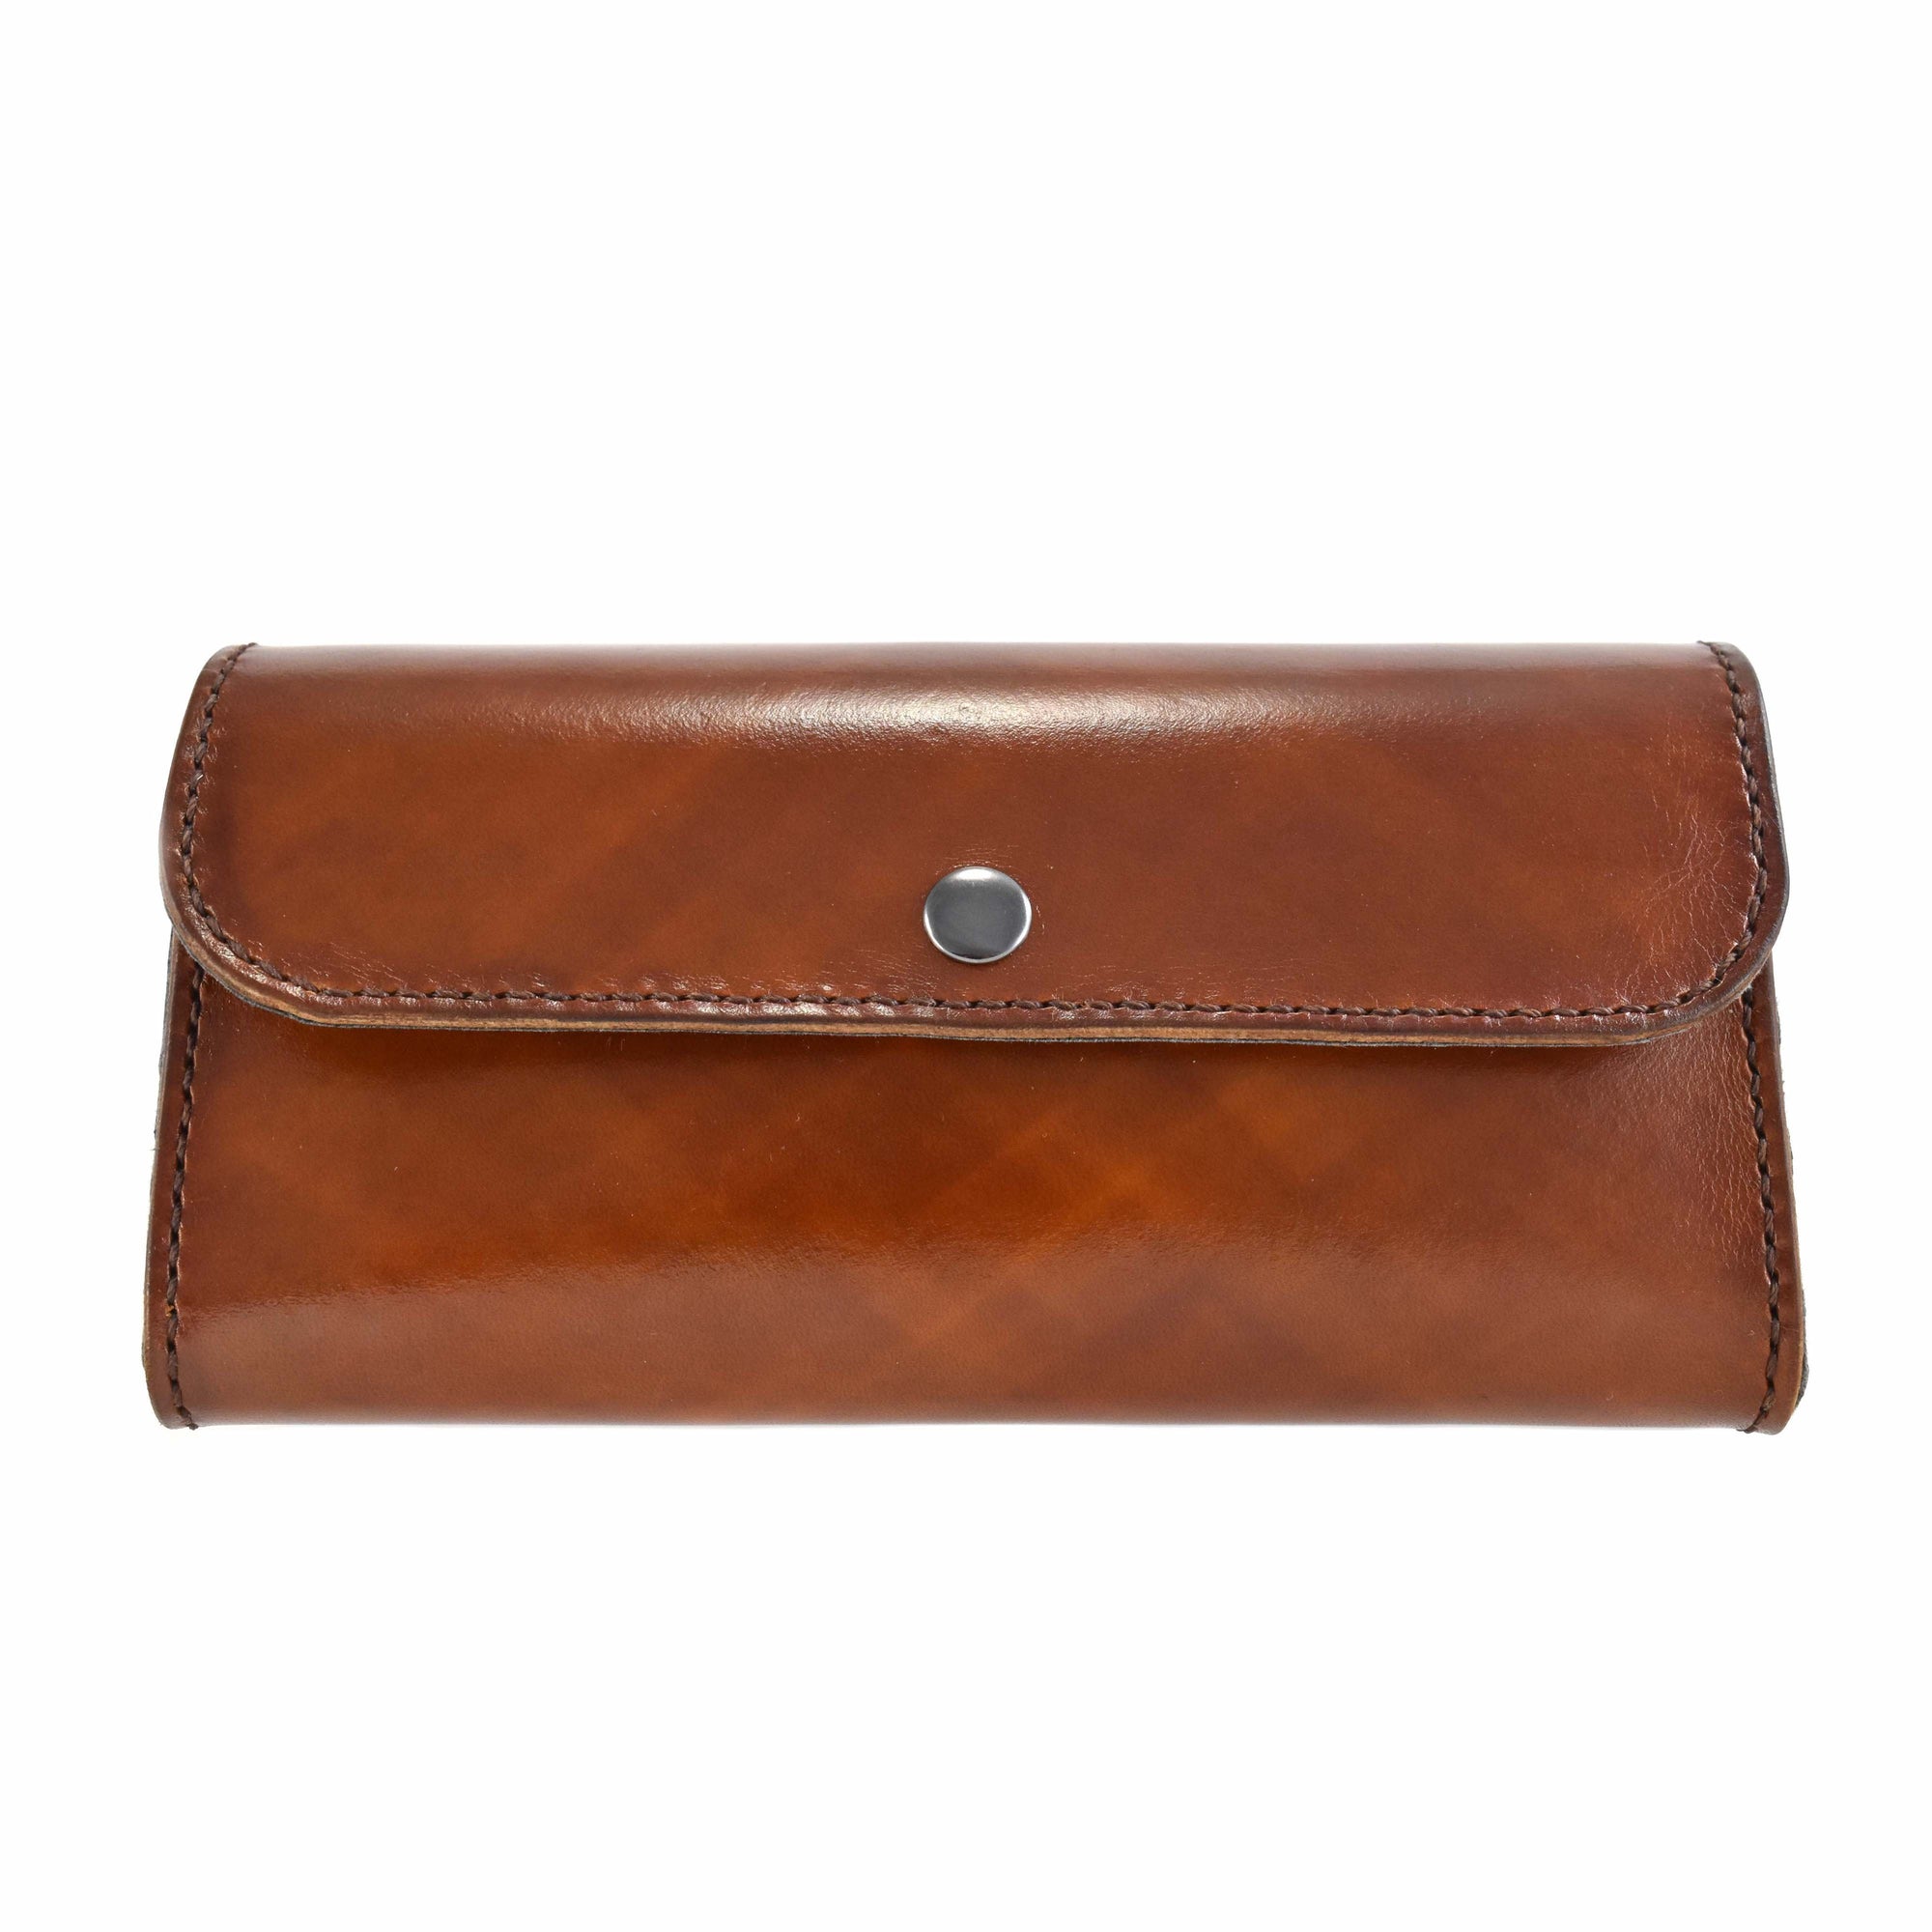 Handcrafted Leather Clutch Wallet - Tree Planted with Purchase - Artisan Goods   4167 - handmade by Beth Millner Jewelry